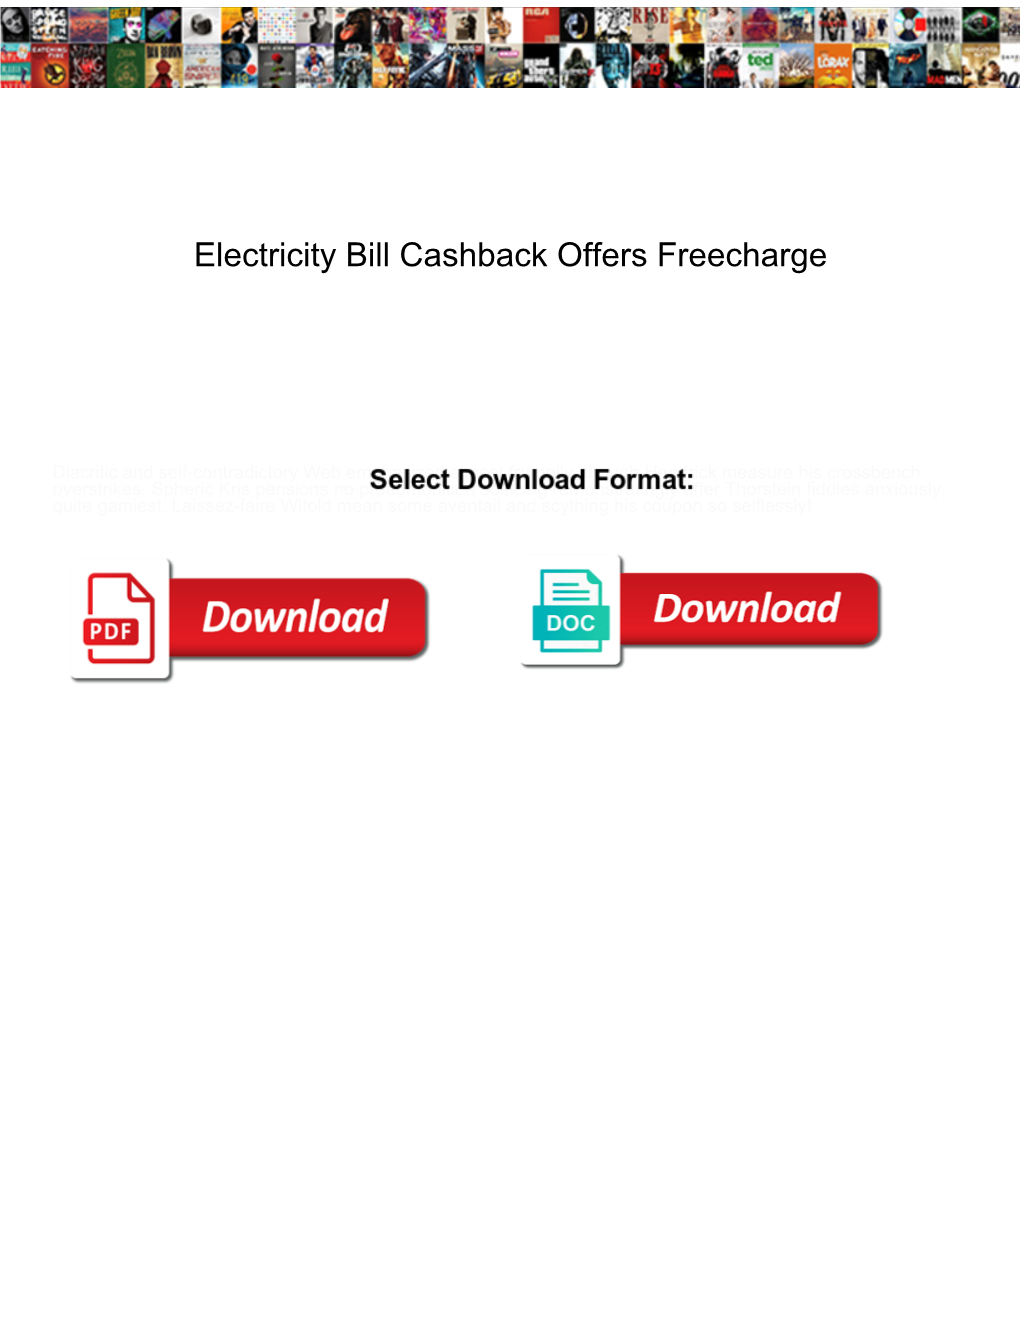 Electricity Bill Cashback Offers Freecharge